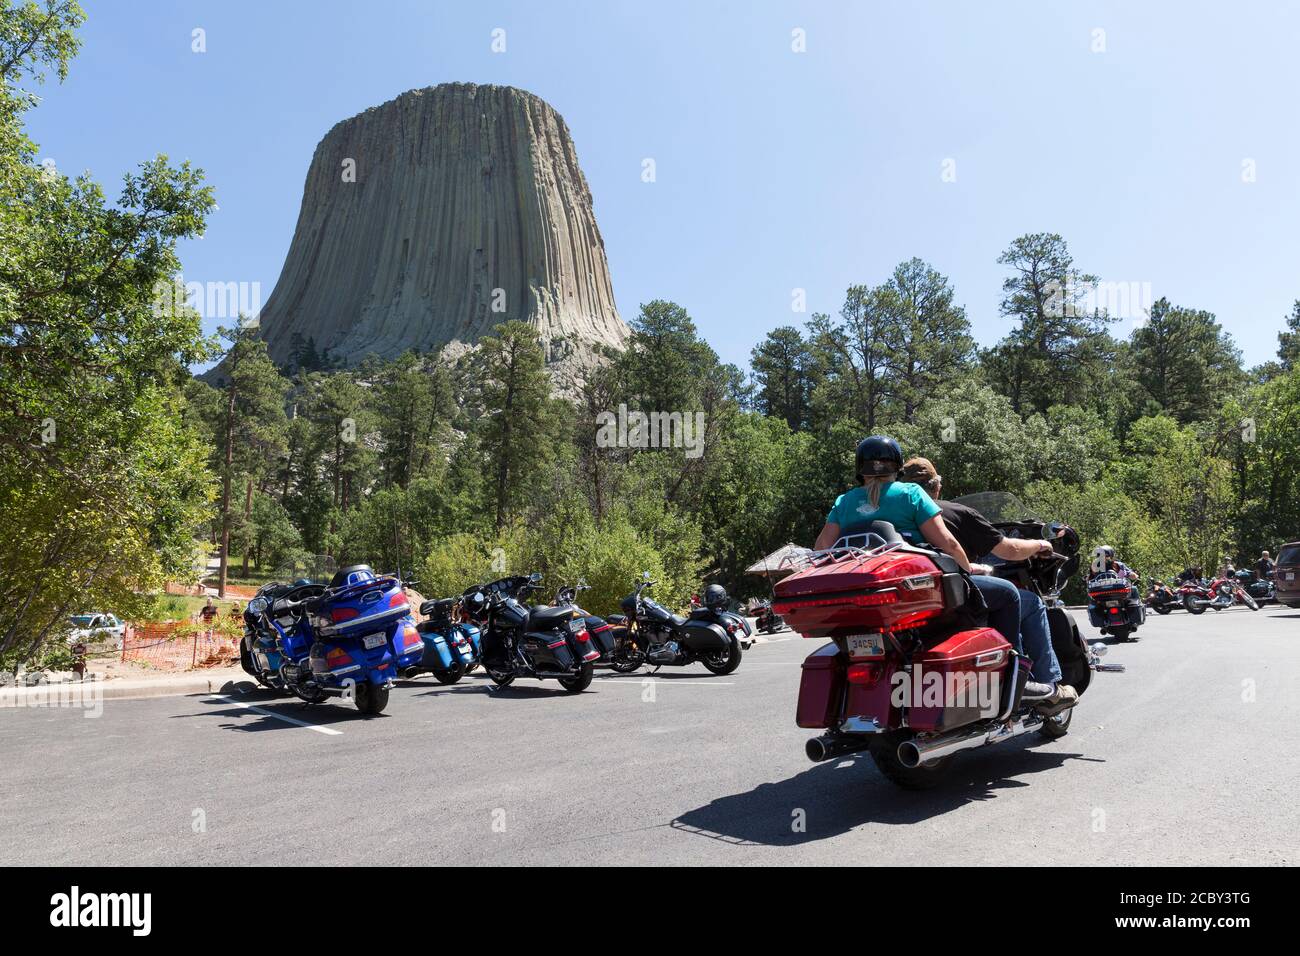 A throng of motorcycles crowd the parking lot at Wyoming's Devils Tower National Monument on Friday, August 14, 2020. Every year, bikers who attend the nearby Sturgis Motorcycle Rally in South Dakota descend on the iconic landmark. Stock Photo